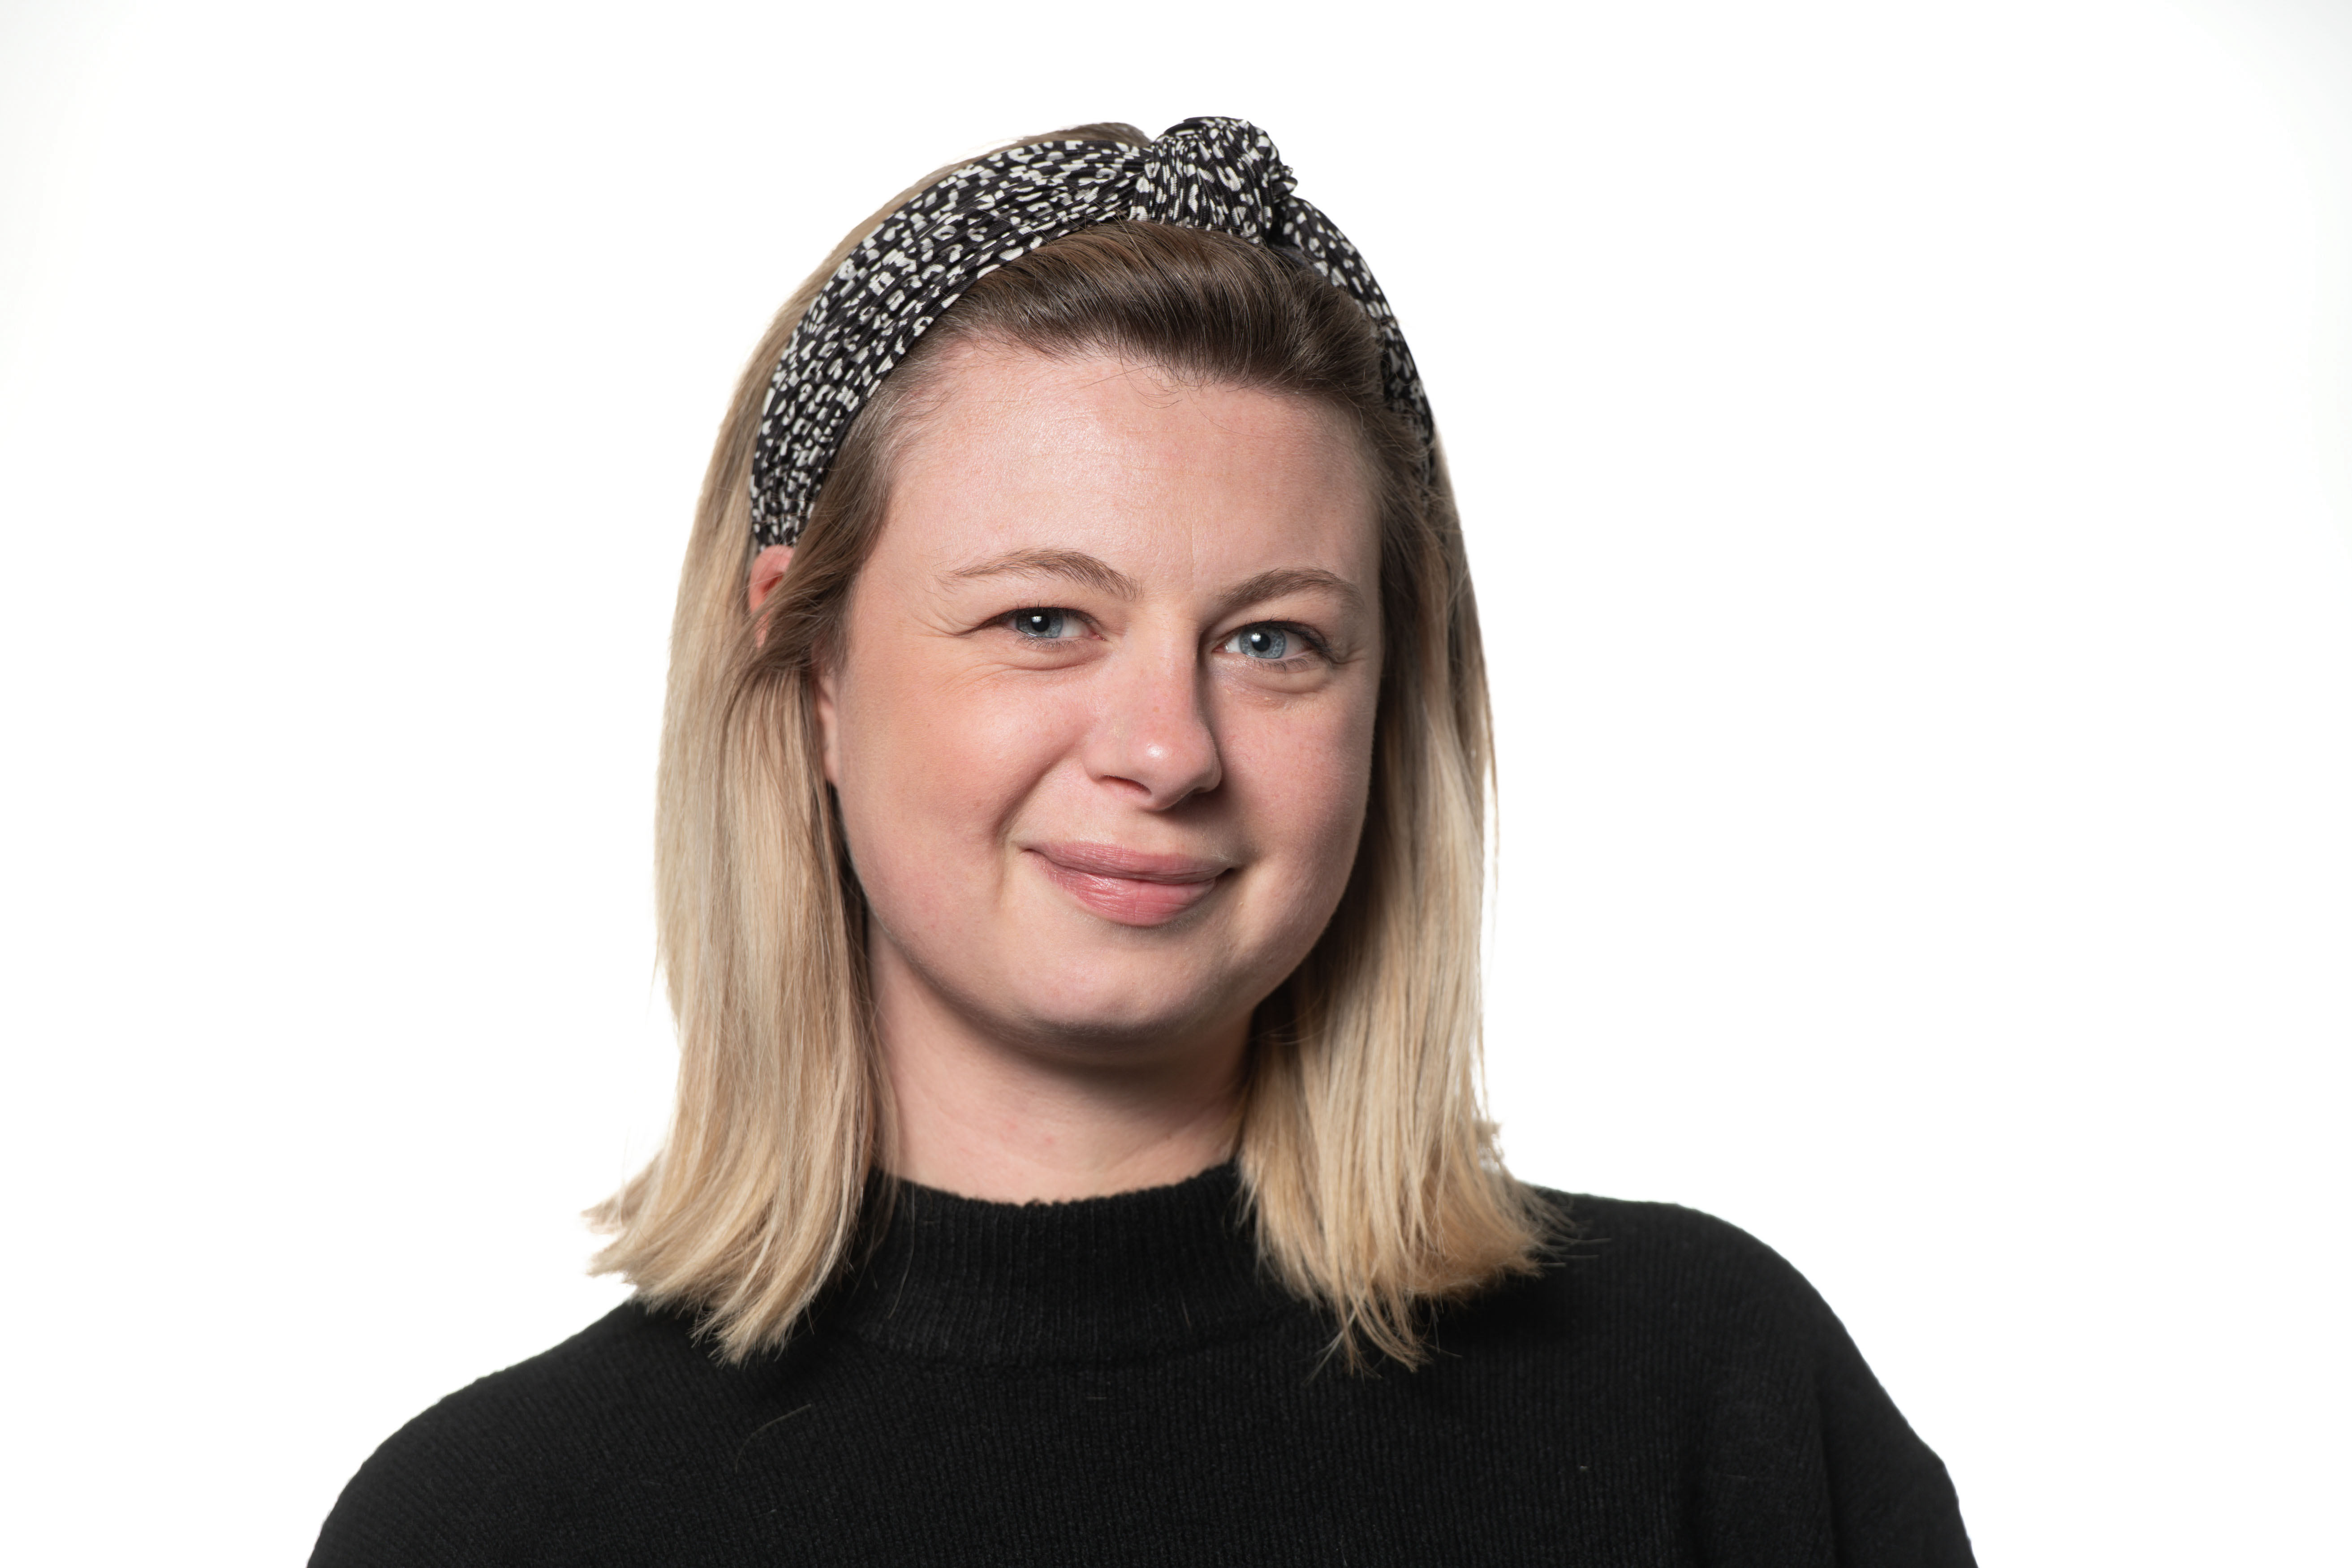 A profile picture of Jennifer Murray, a Lecturer in Fashion and Marketing at GCU.